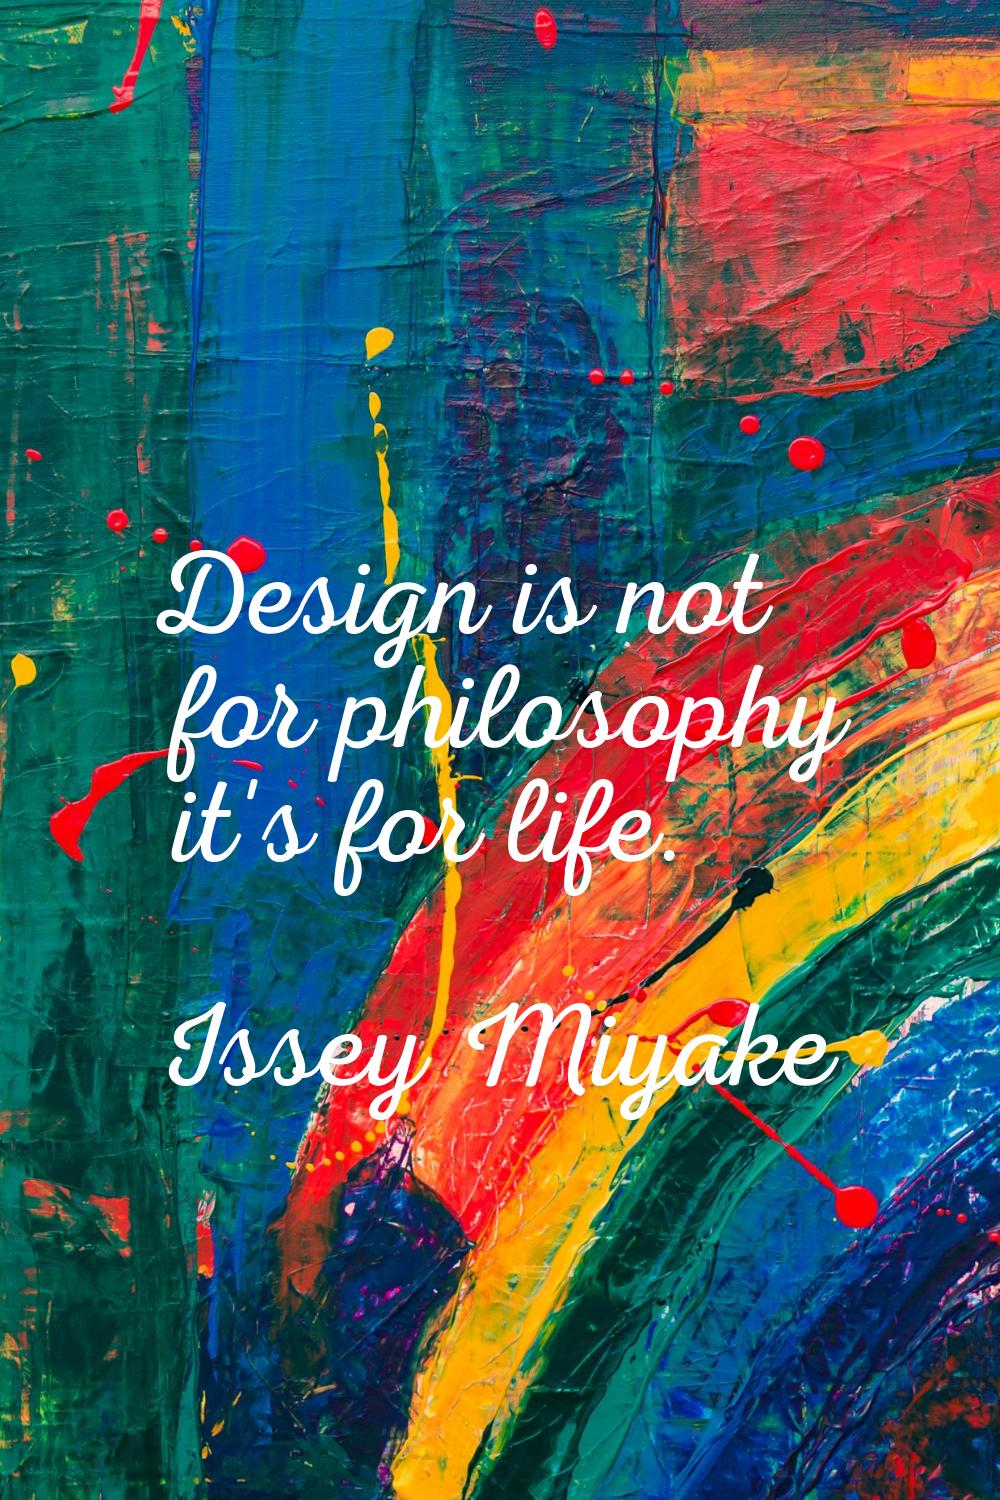 Design is not for philosophy it's for life.